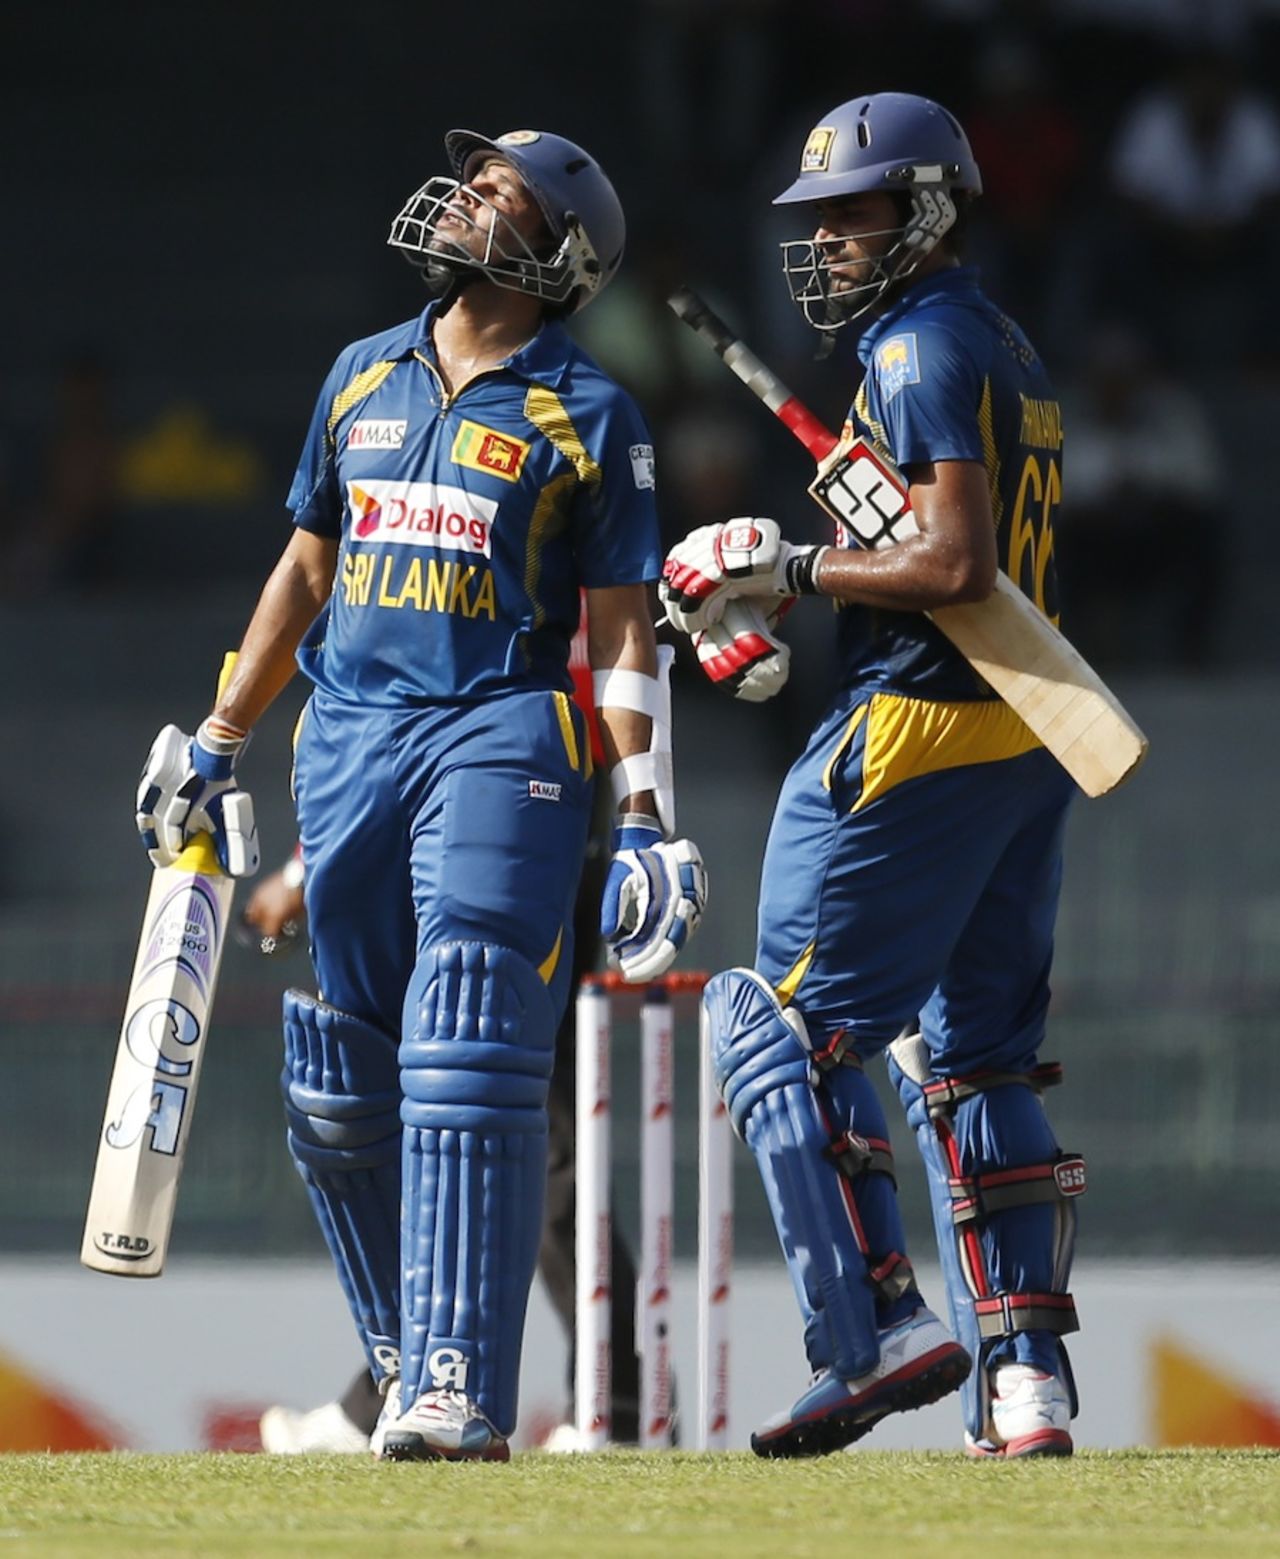 Tillakaratne Dilshan looks to the heavens after his fifty, Sri Lanka v South Africa, 5th ODI, Colombo, July 31, 2013